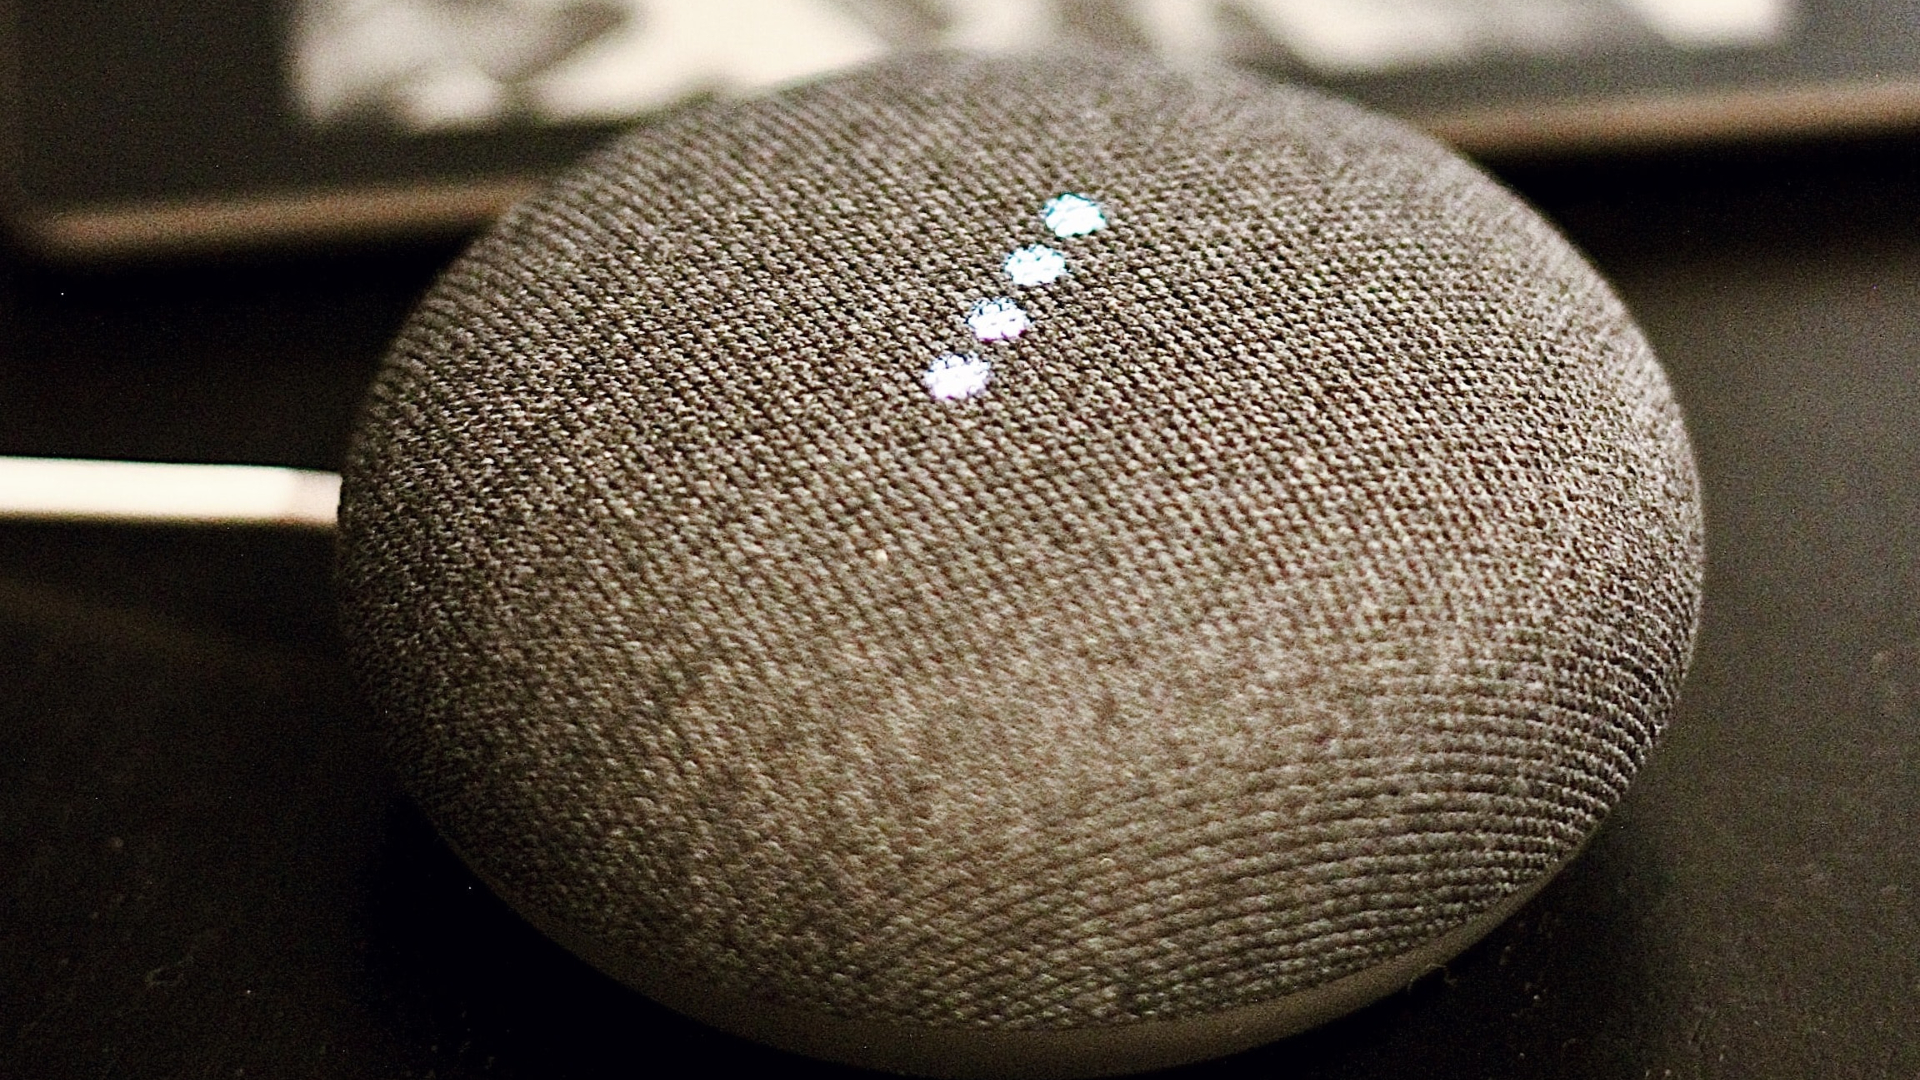 Nest speaker can't connect to Wi-Fi